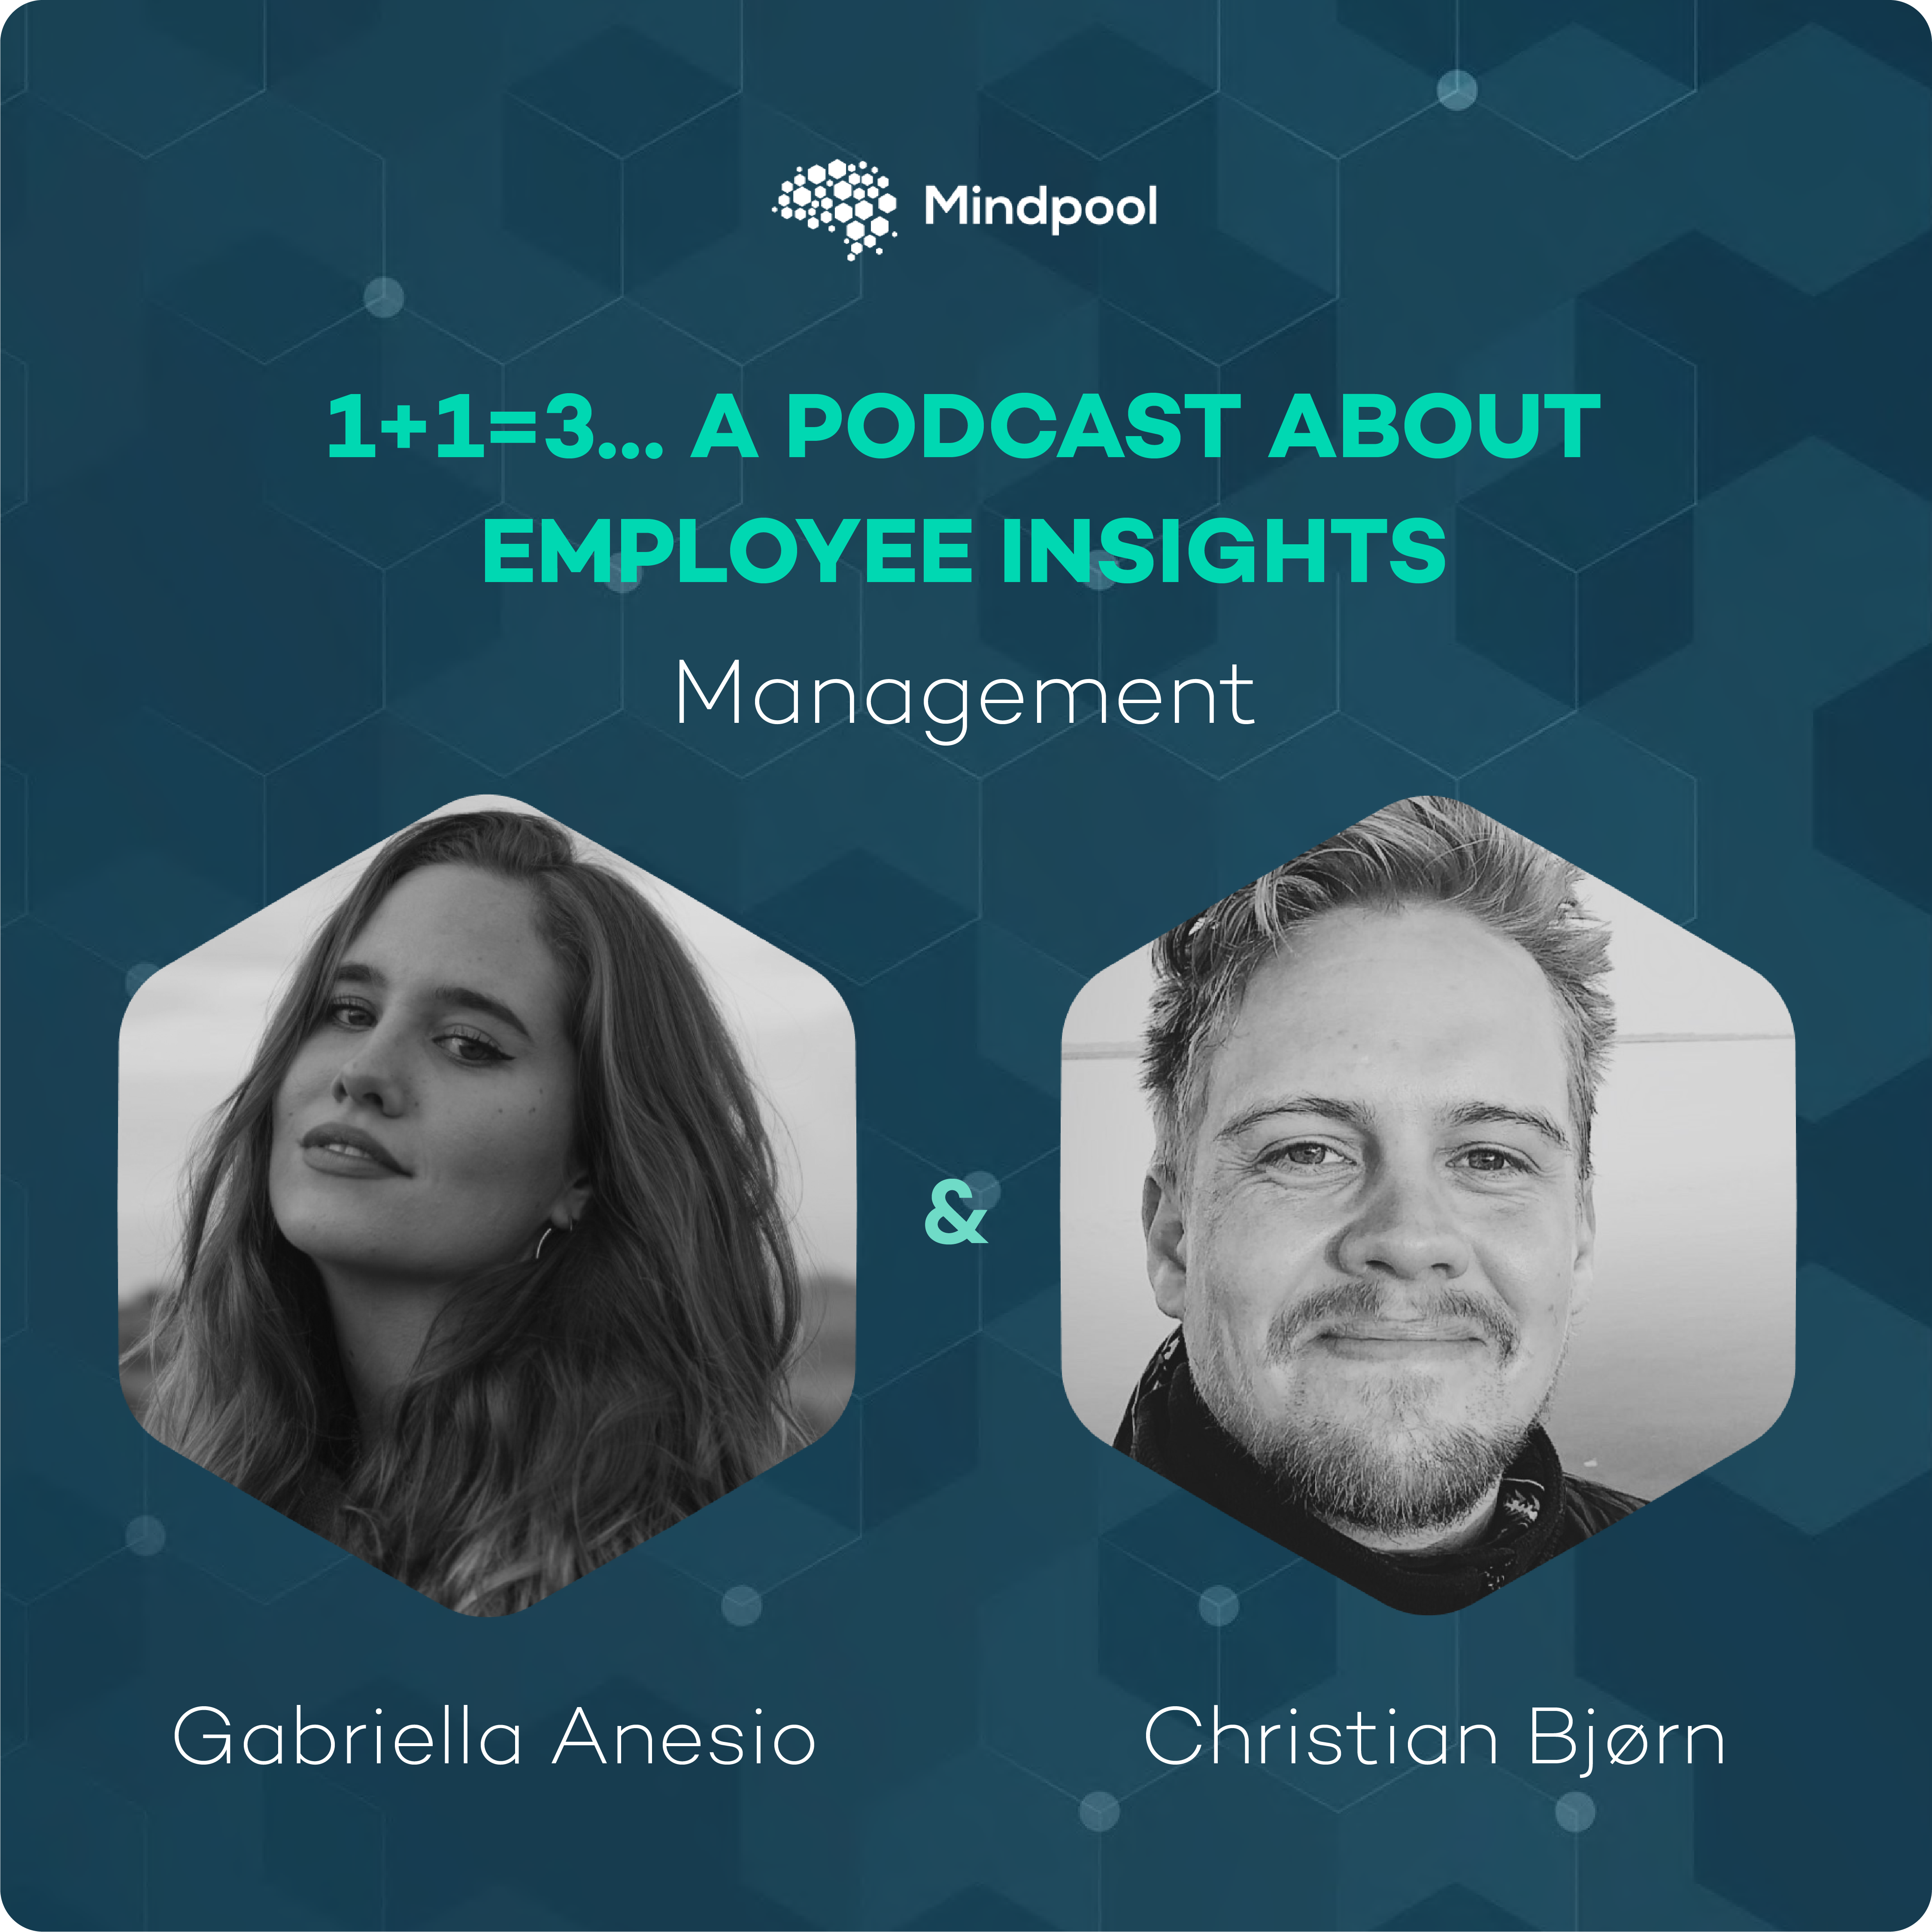 <p>1+1=3: A podcast about employee insights #3</p>